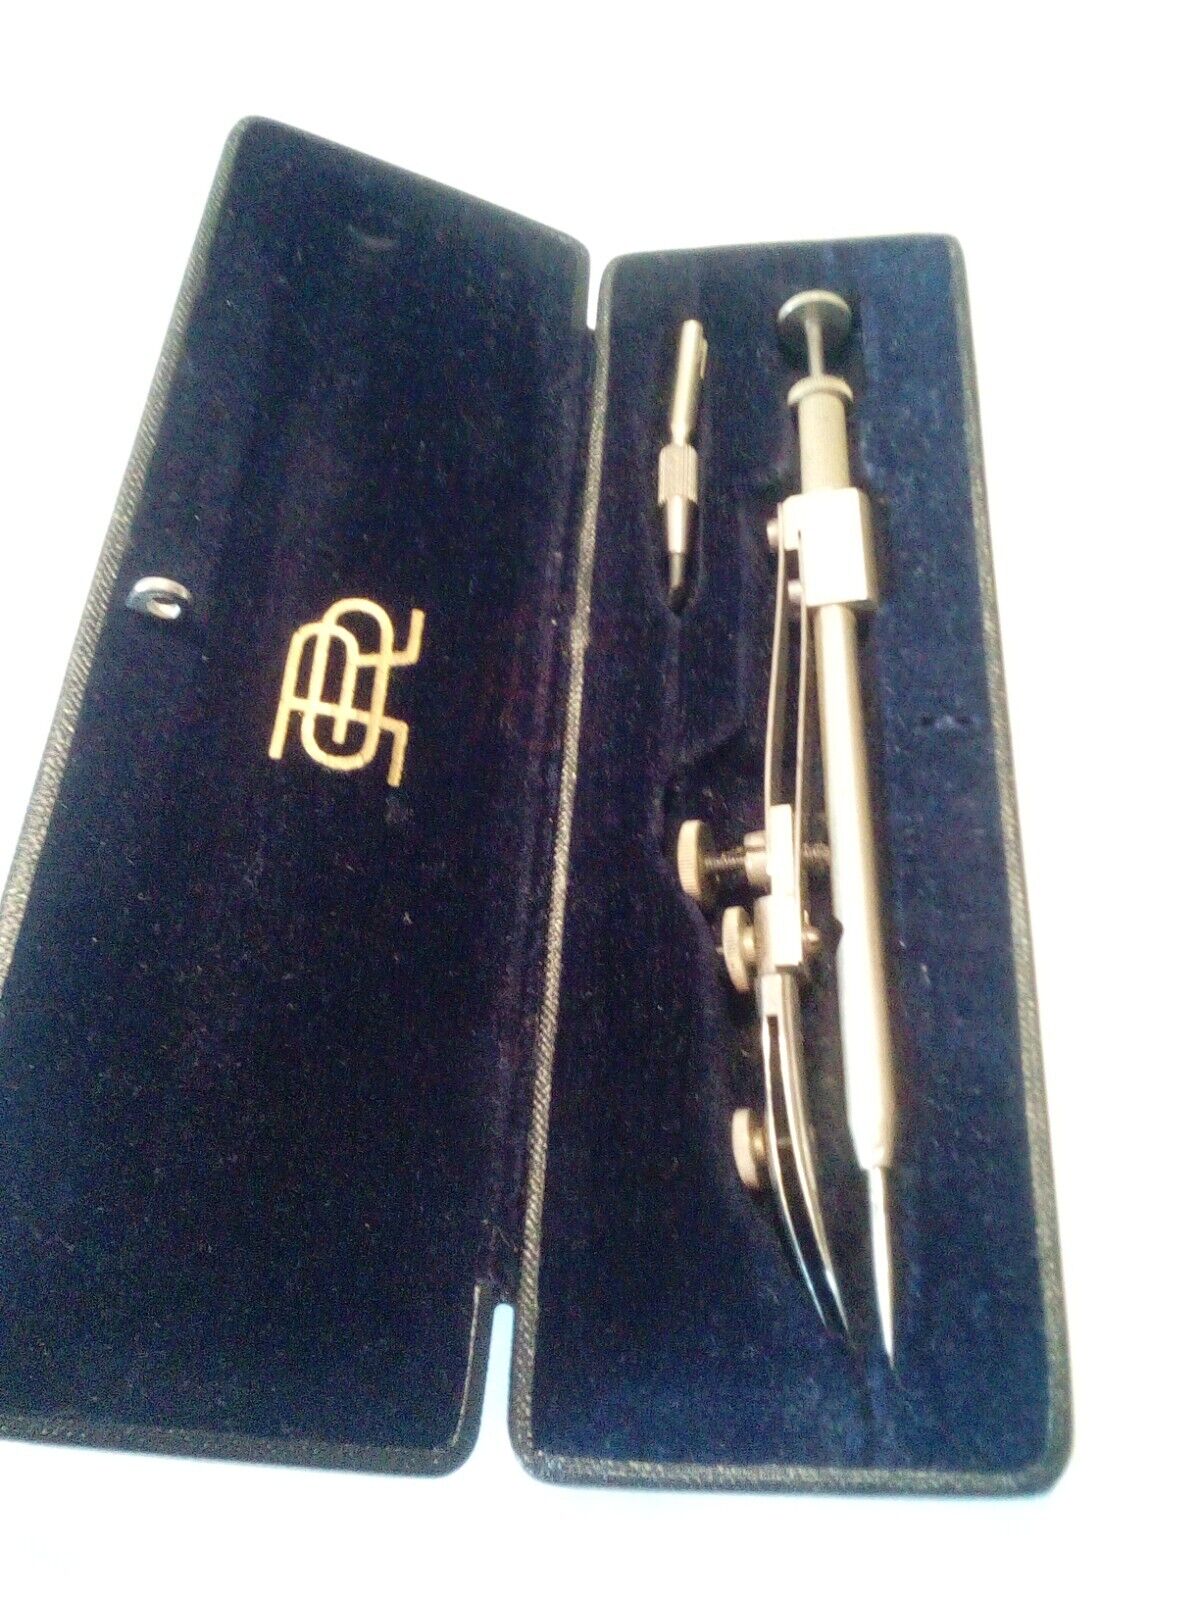 VINTAGE E.O.RICHTER & Co PRACISION COMPASS DRAFTING SMALL TOOL SET,GERMANY